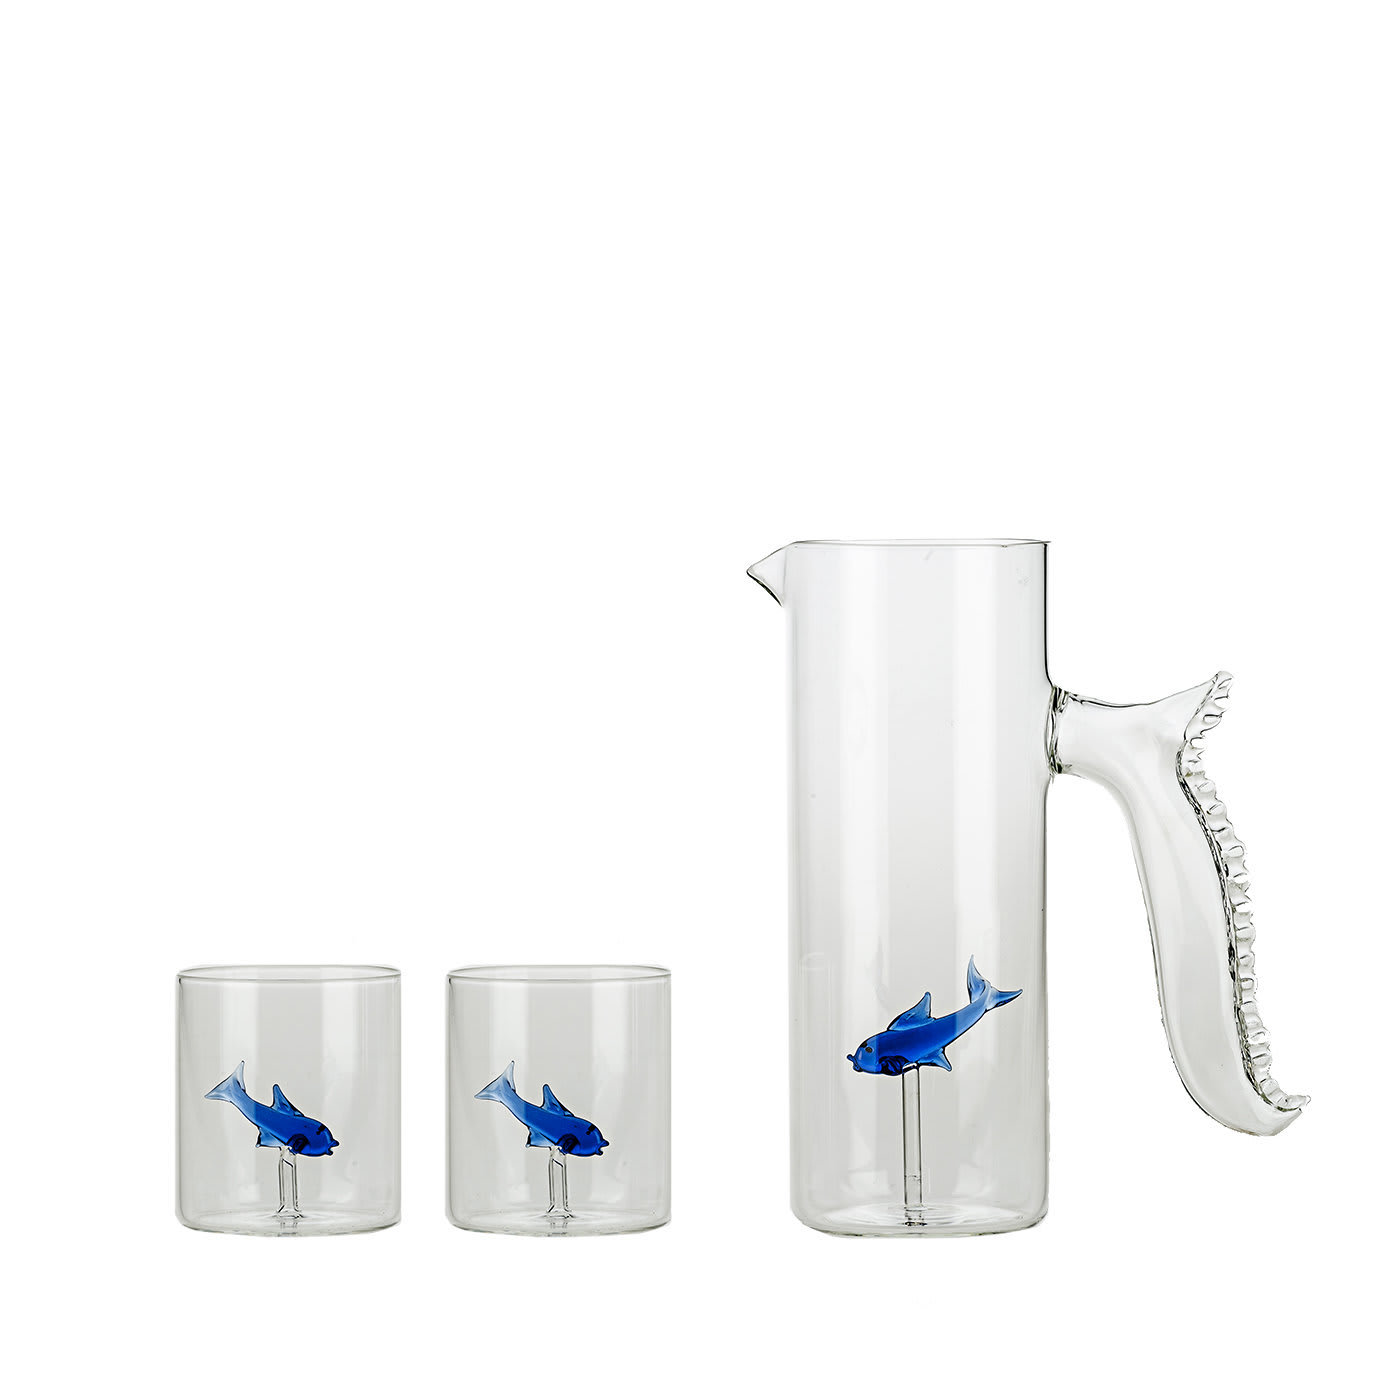 Set of Little Blue Fish Pitcher and Four Little Blue Fish Glasses - Casarialto